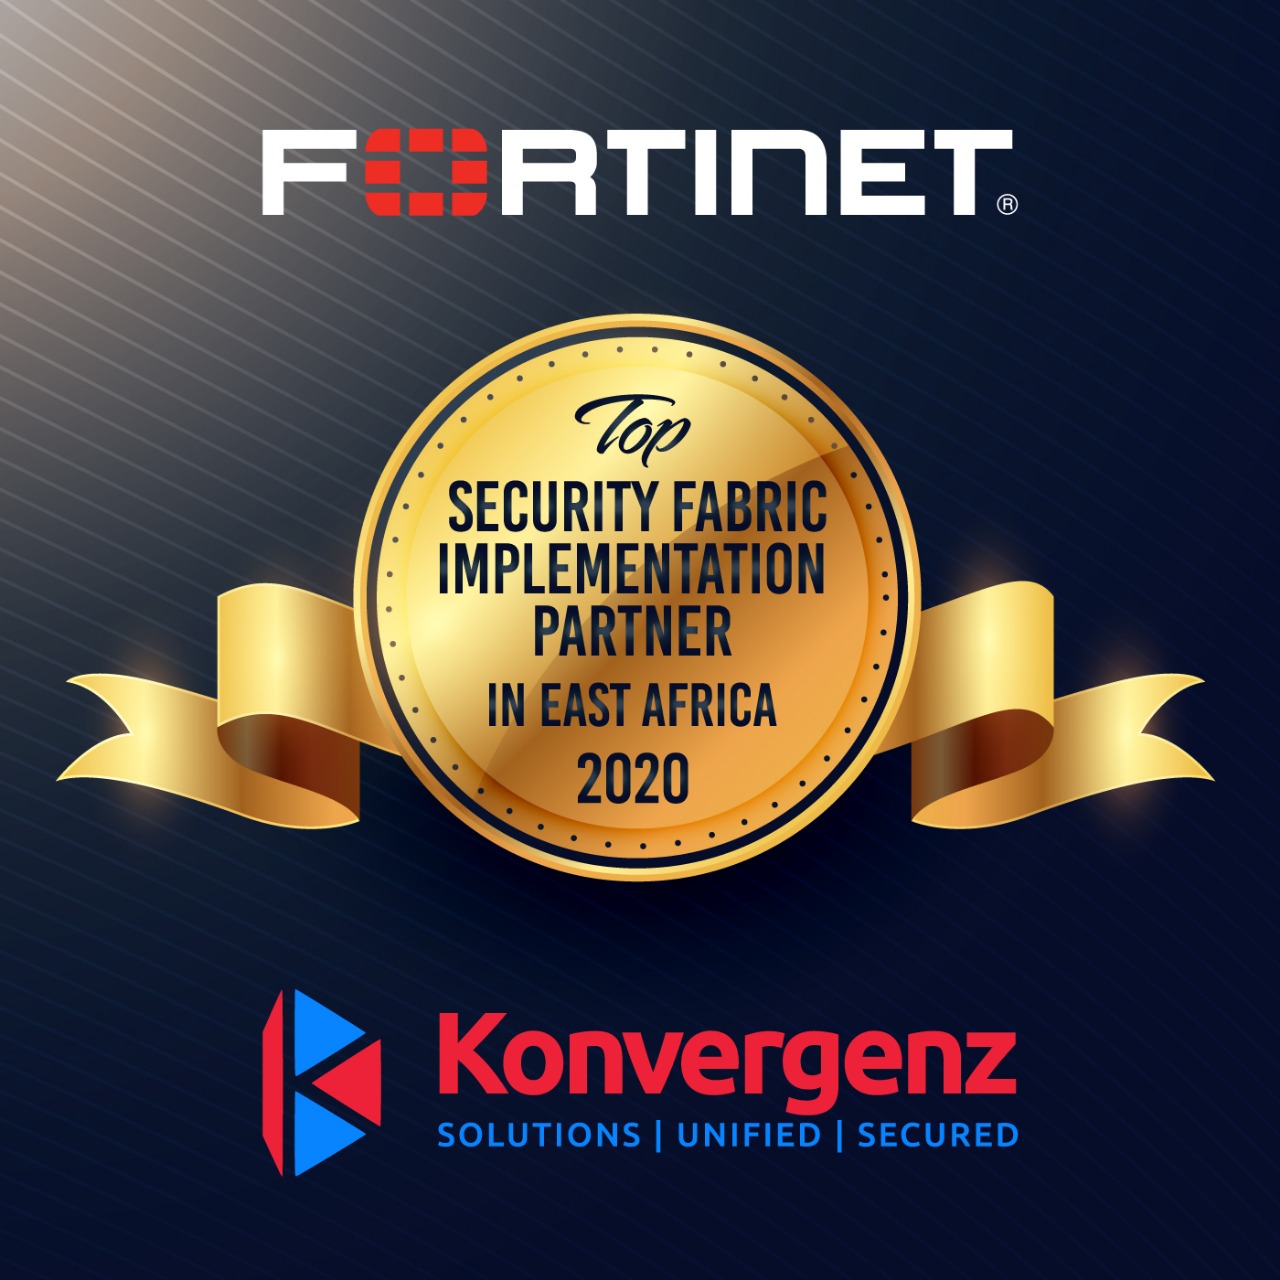 Top Security Fabric Implementation Partner in East Africa 2020